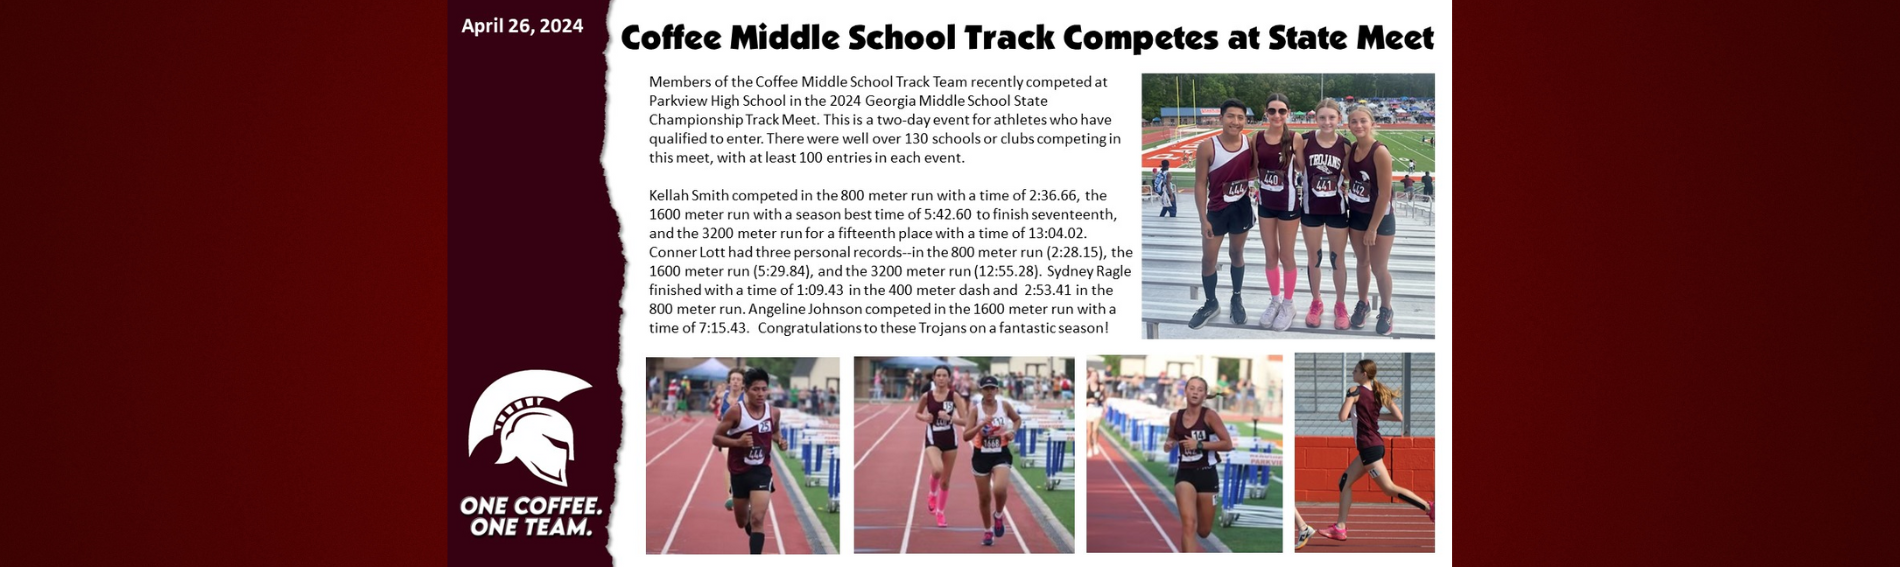 April 26, 2024 Coffee Middle School Track Competes at State Meet. Members of the Coffee Middle School Track Team recently competed at Parkview High School in the 2024 Georgia Middle School State Championship Track Meet. This is a two-day event for athletes who have qualified to enter. There were well over 130 schools or clubs competing in this meet, with at least 100 entries in each event.  Kellah Smith competed in the 800 meter run with a time of 2:36.66, the 1600 meter run with a season best time of 5:42.60 to finish seventeenth, and the 3200 meter run for a fifteenth place with a time of 13:04.02. Conner Lott had three personal records--in the 800 meter run (2:28.15), the 1600 meter run (5:29.84), and the 3200 meter run (12:55.28). Sydney Ragle finished with a time of 1:09.43 in the 400 meter dash and  2:53.41 in the 800 meter run. Angeline Johnson competed in the 1600 meter run with a time of 7:15.43.  Congratulations to these Trojans on a fantastic season!  GO TROJANS!